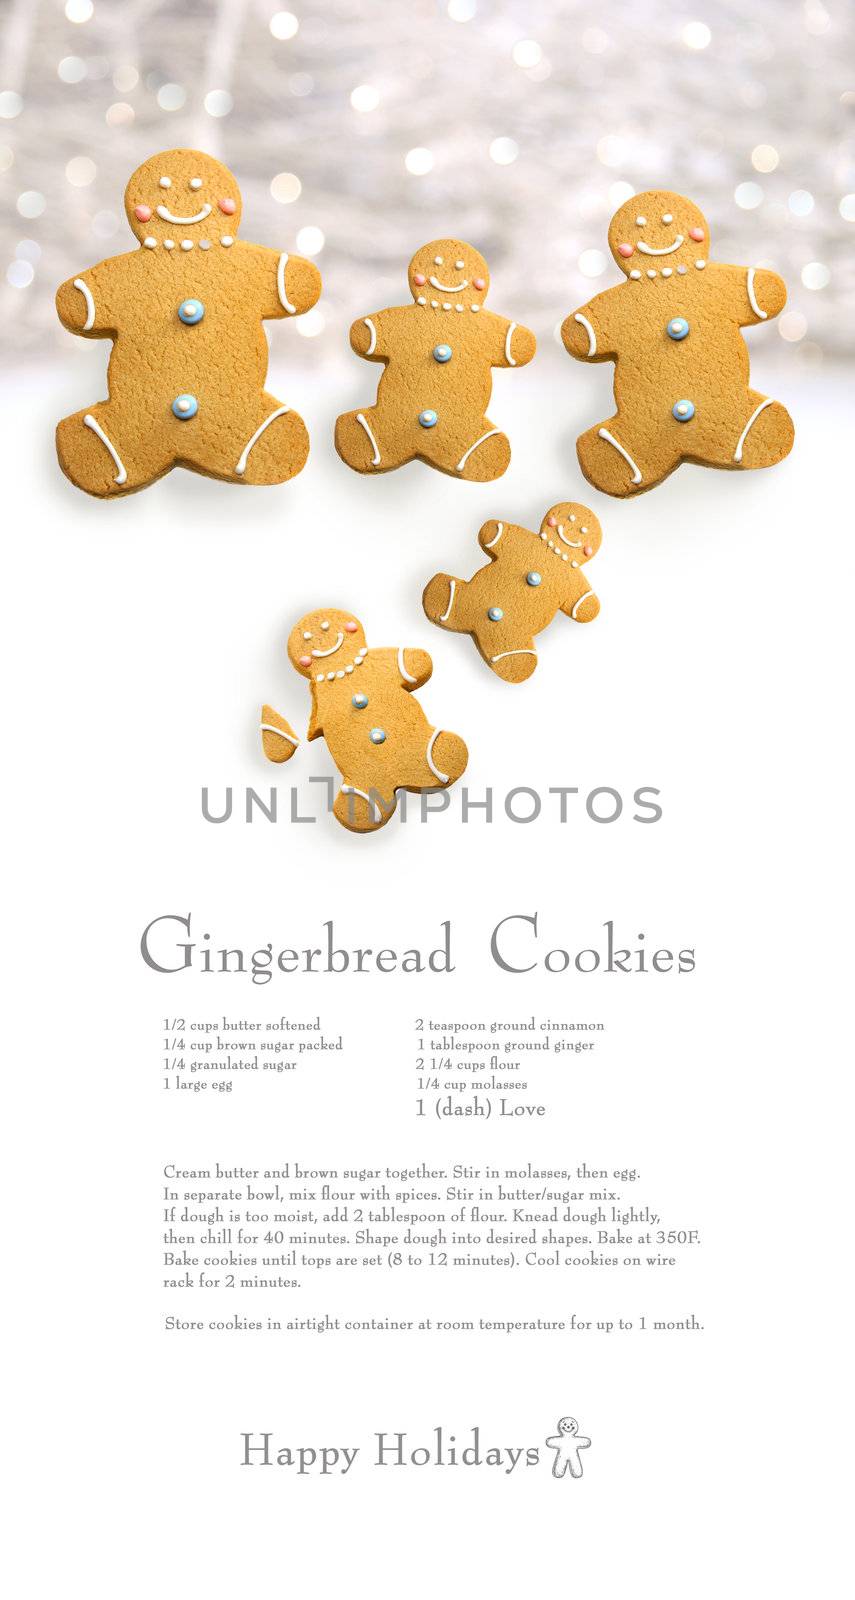 Gingerbread men cookies with recipe by Sandralise